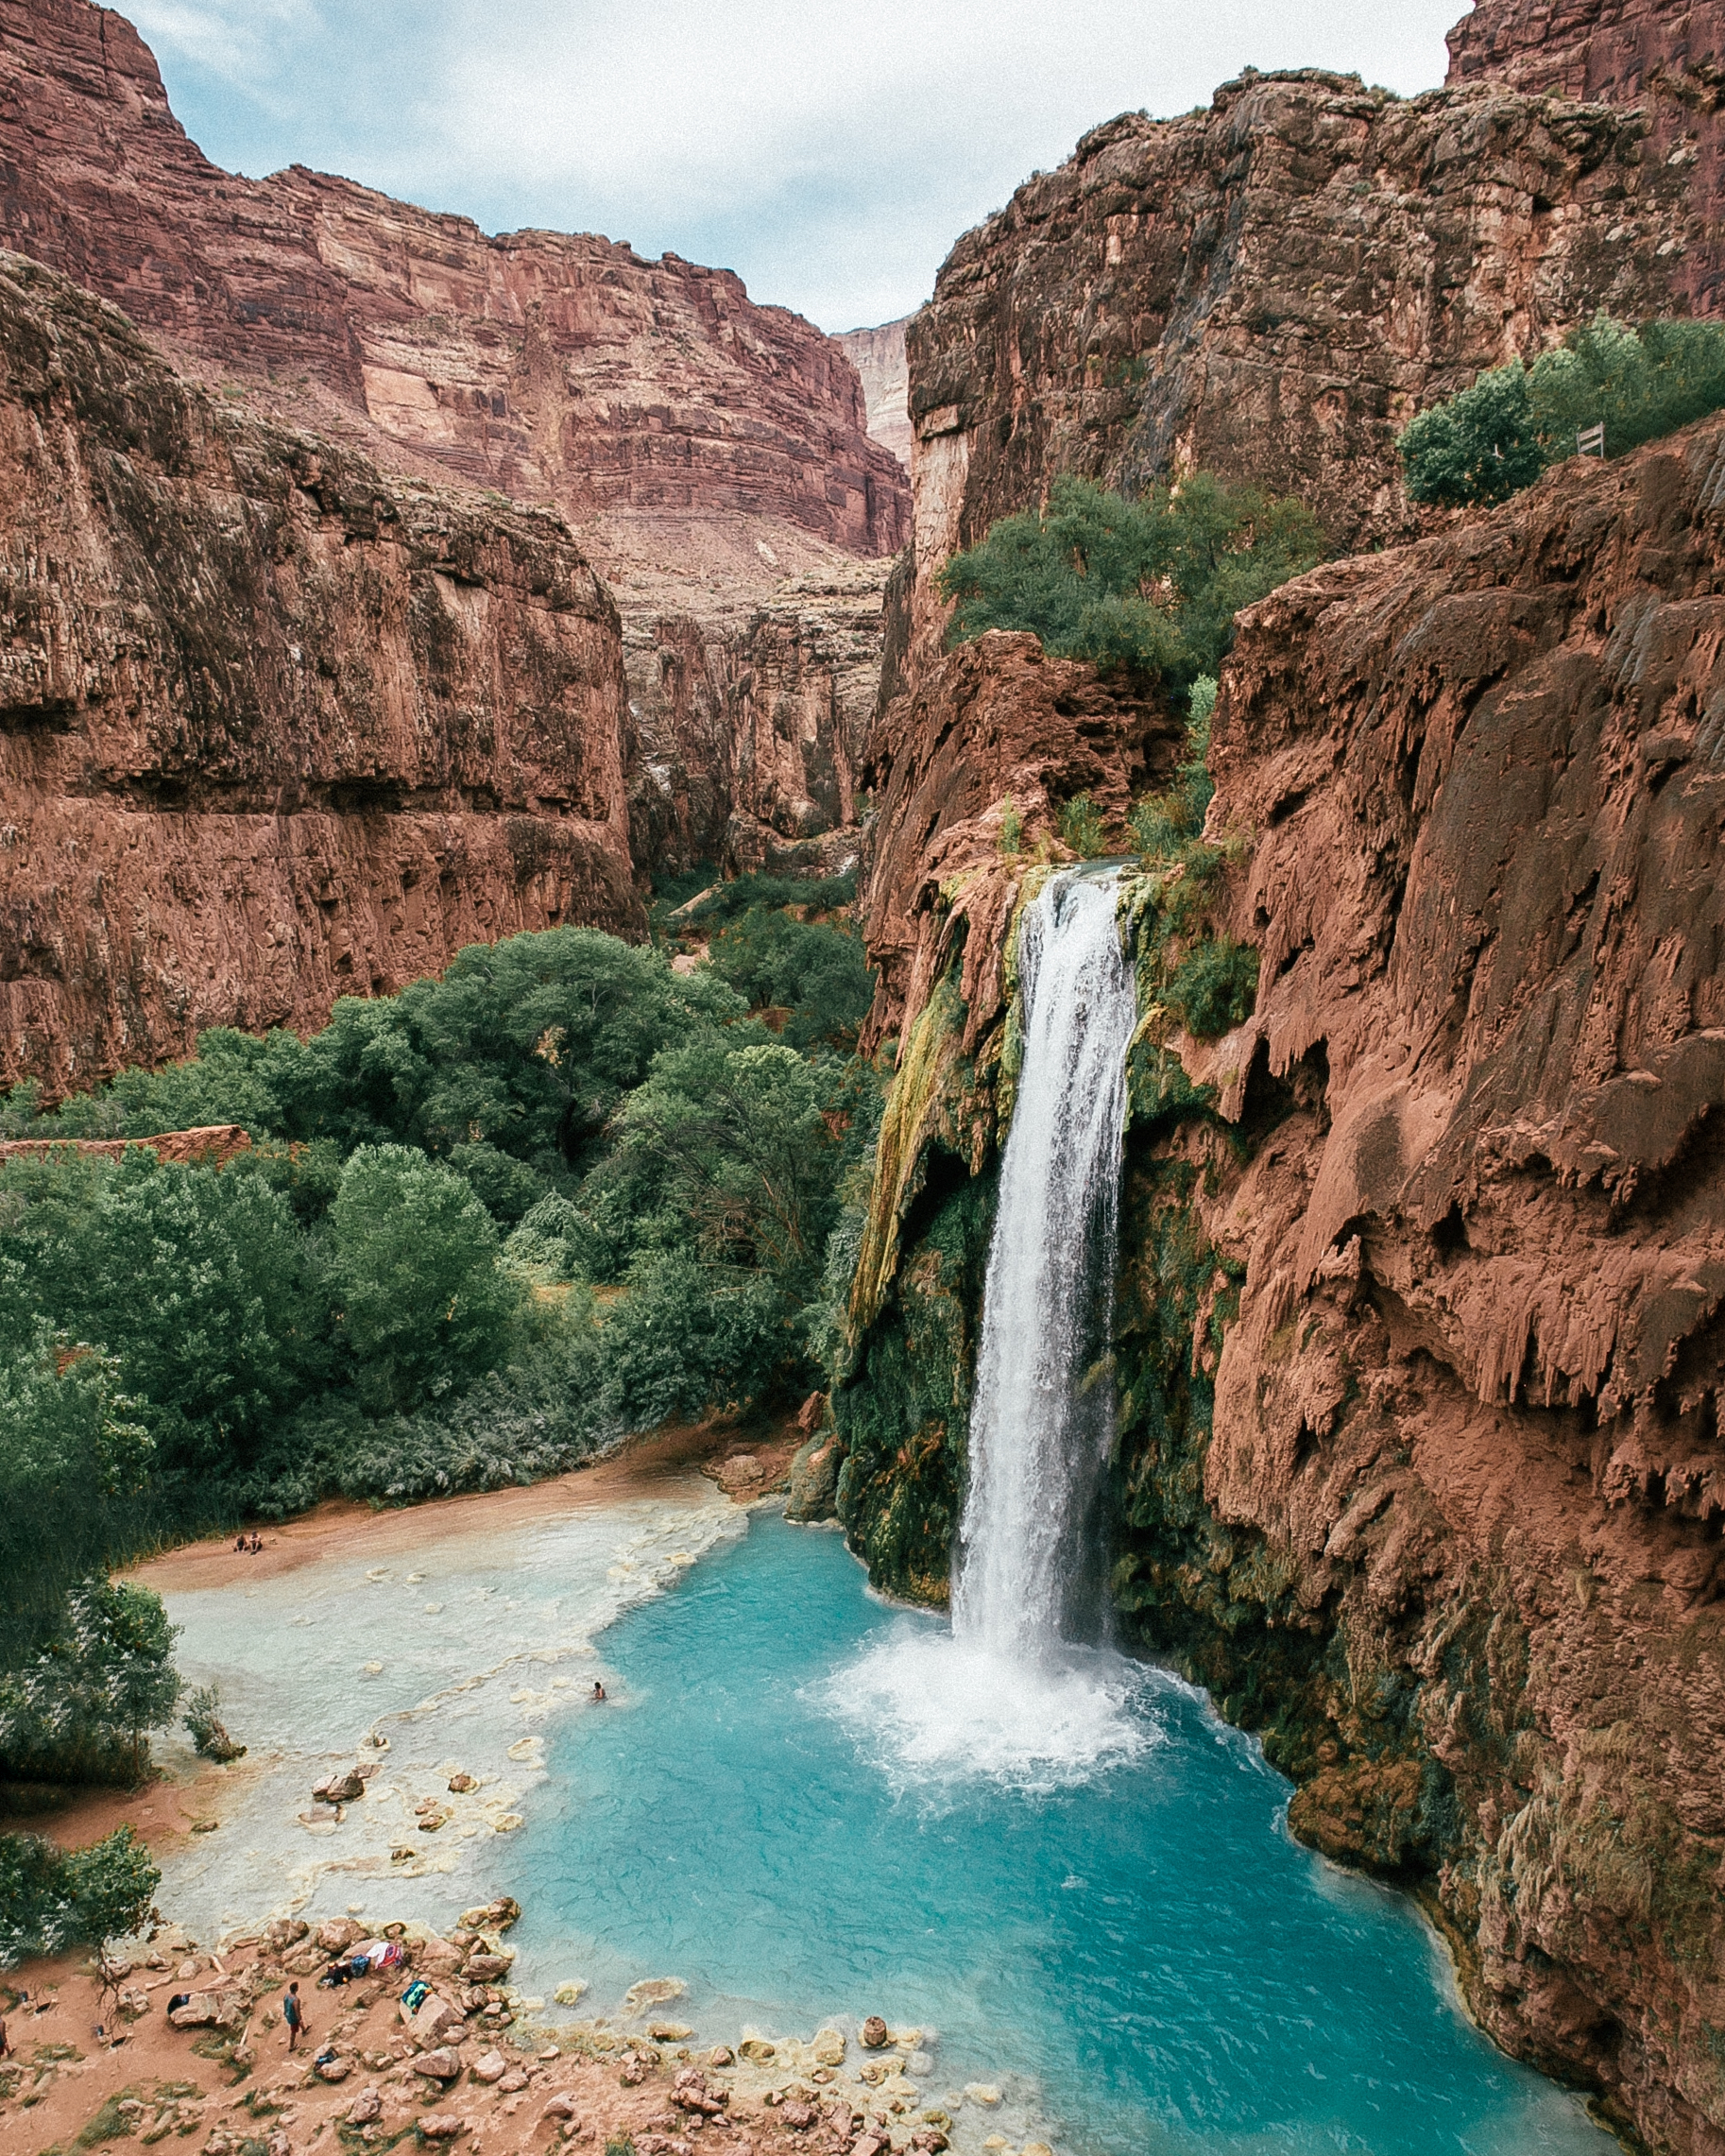 A complete guide to hiking Havasupai including permits, lottery information, waterfalls, campsites, hiking tips and more.